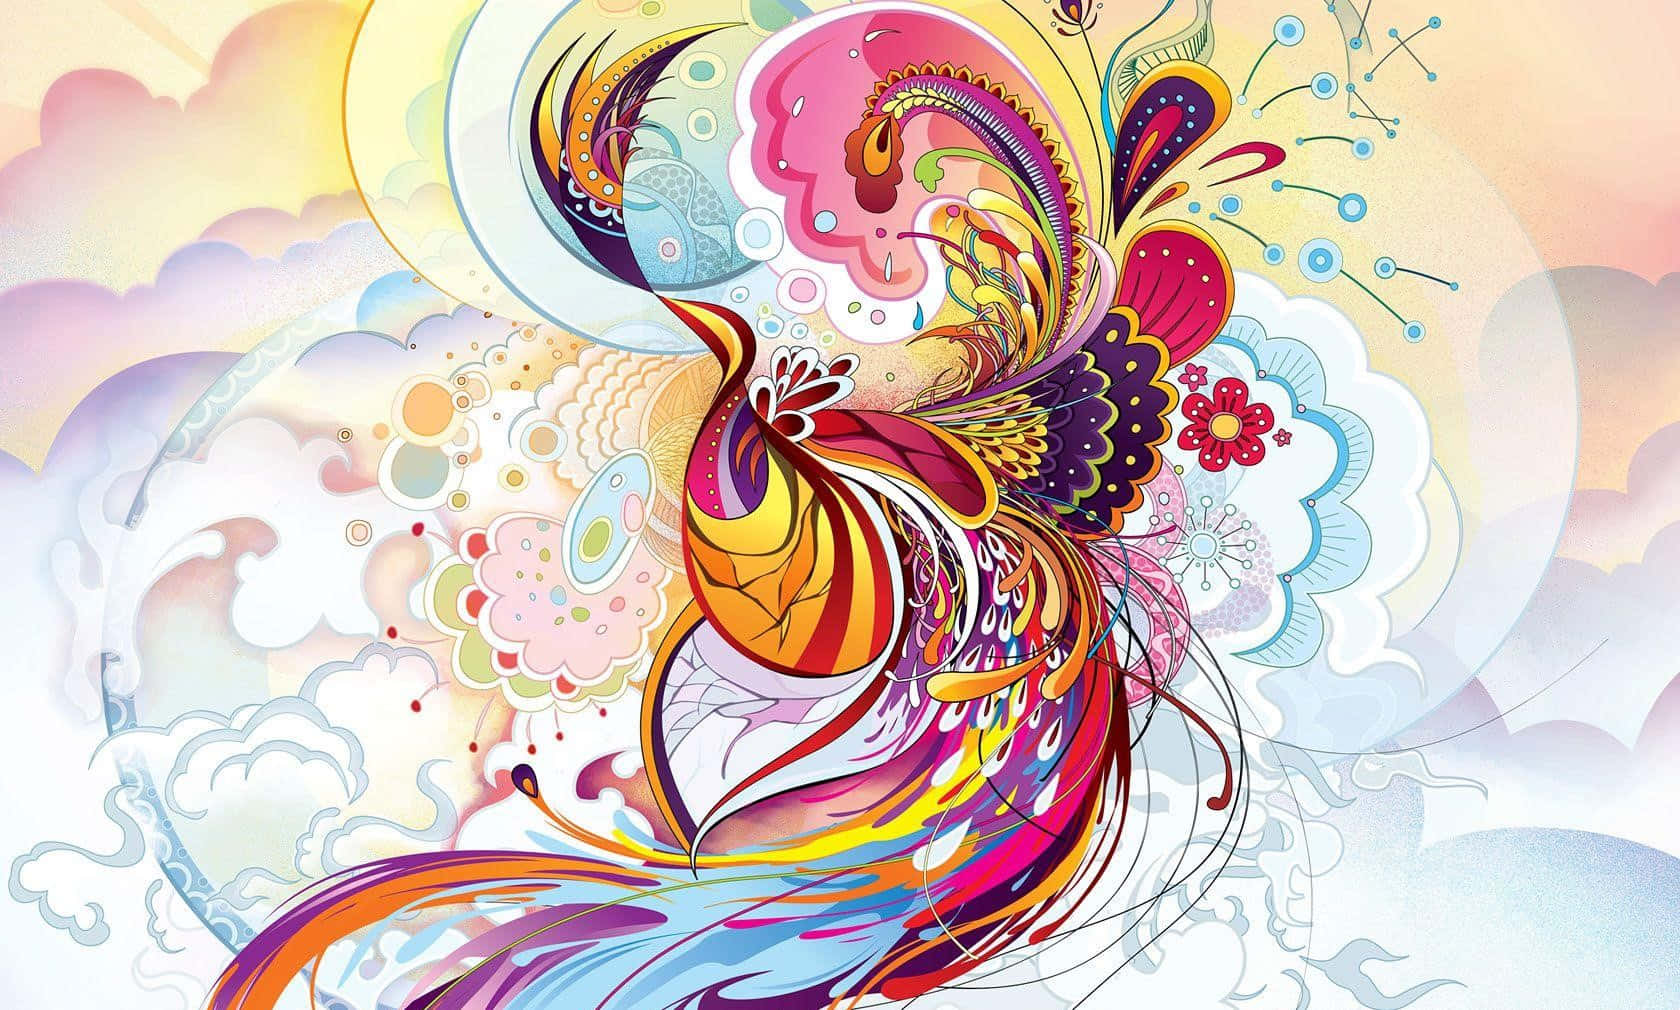 A Colorful Bird With Colorful Feathers And Swirls